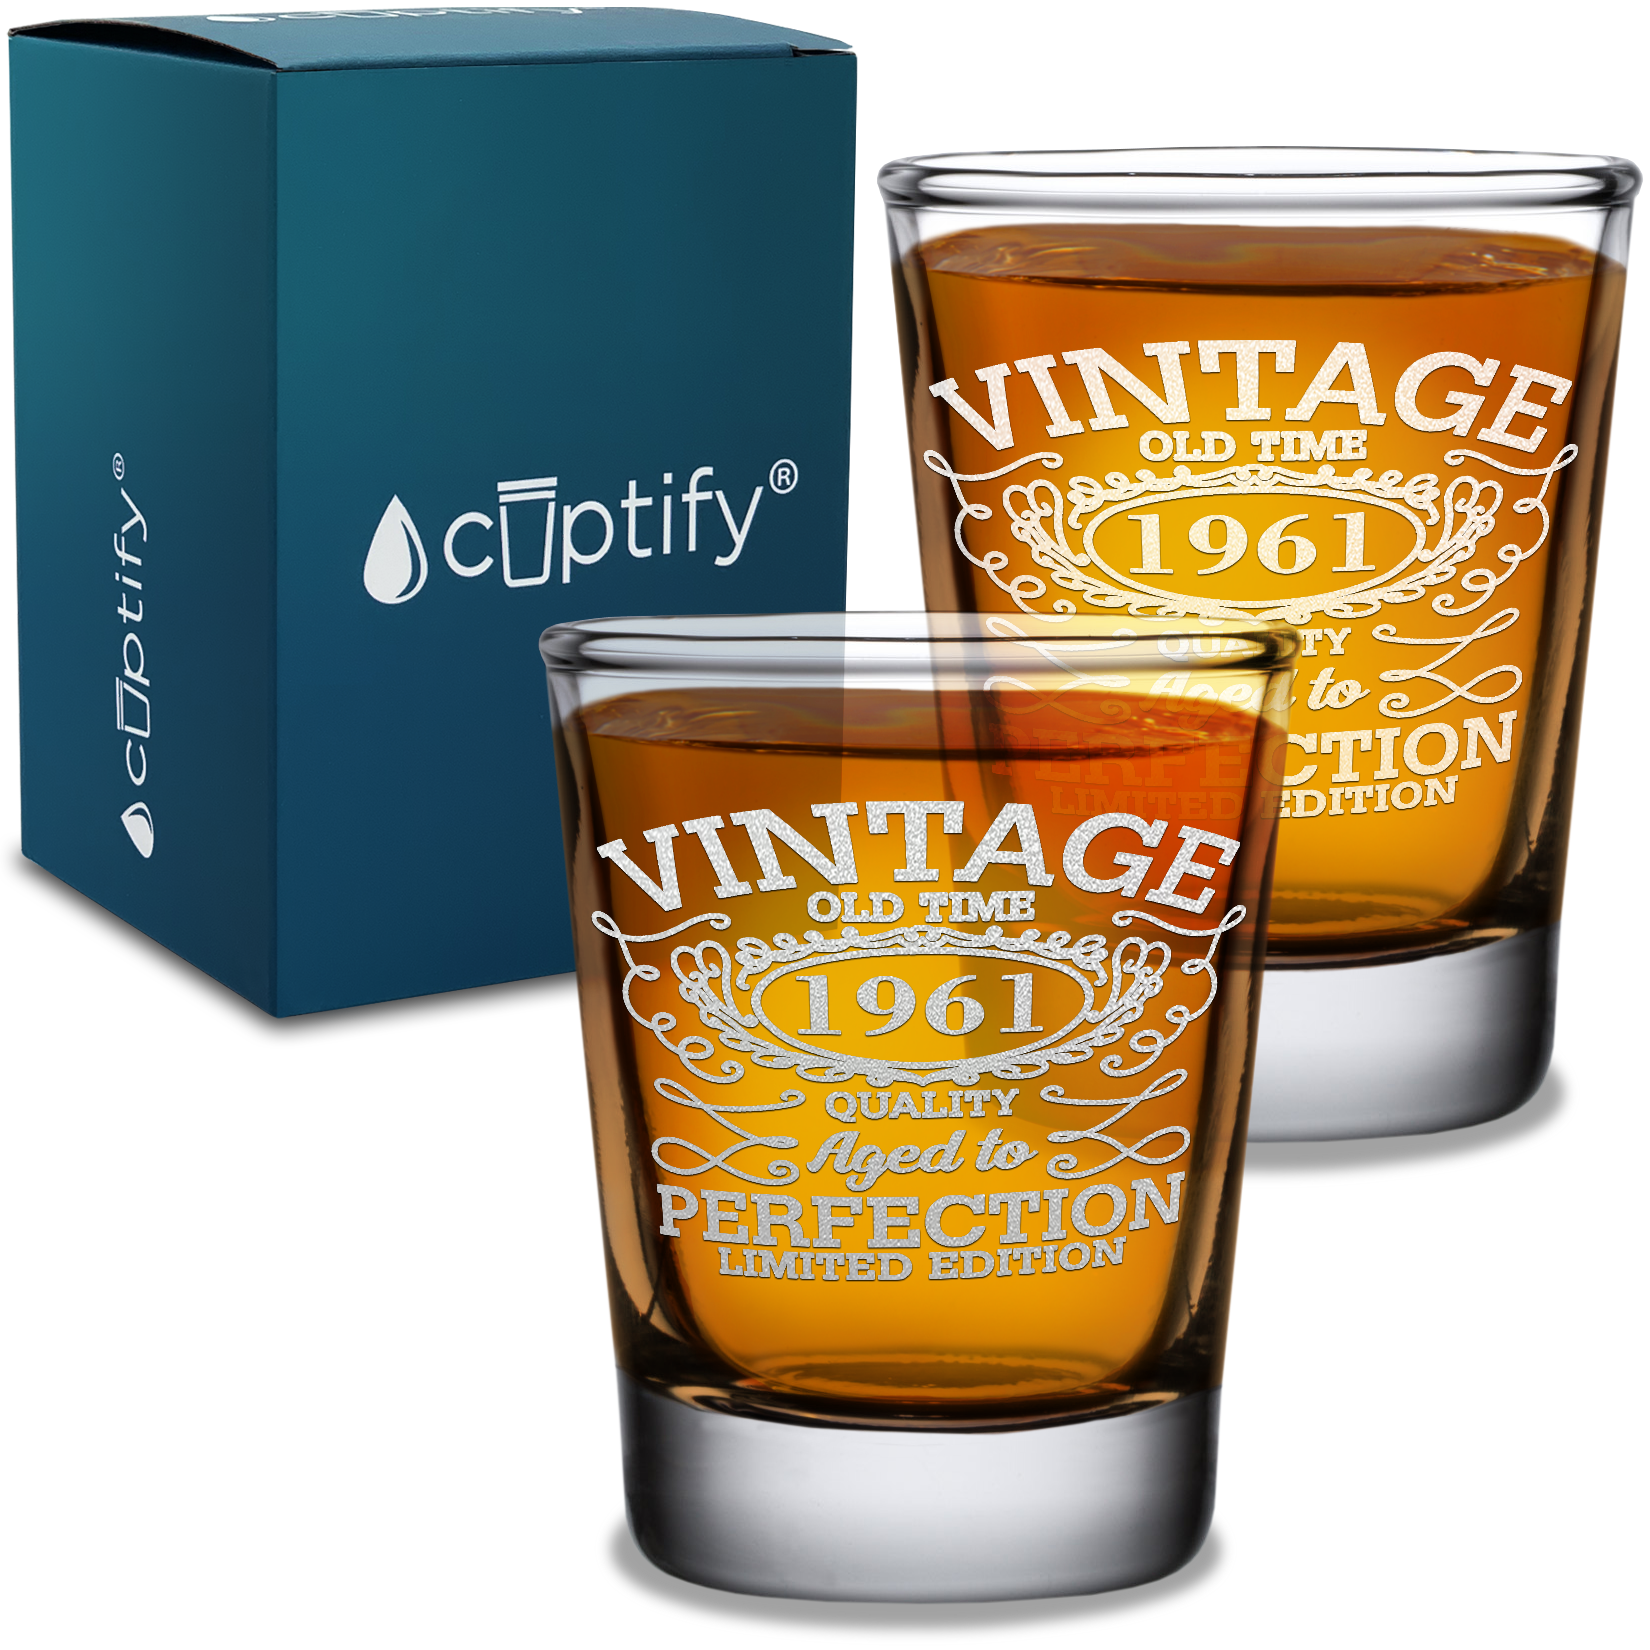 60th Birthday Vintage 60 Years Old Time 1961 Quality Laser Engraved 2oz Shot Glasses - Set of 2